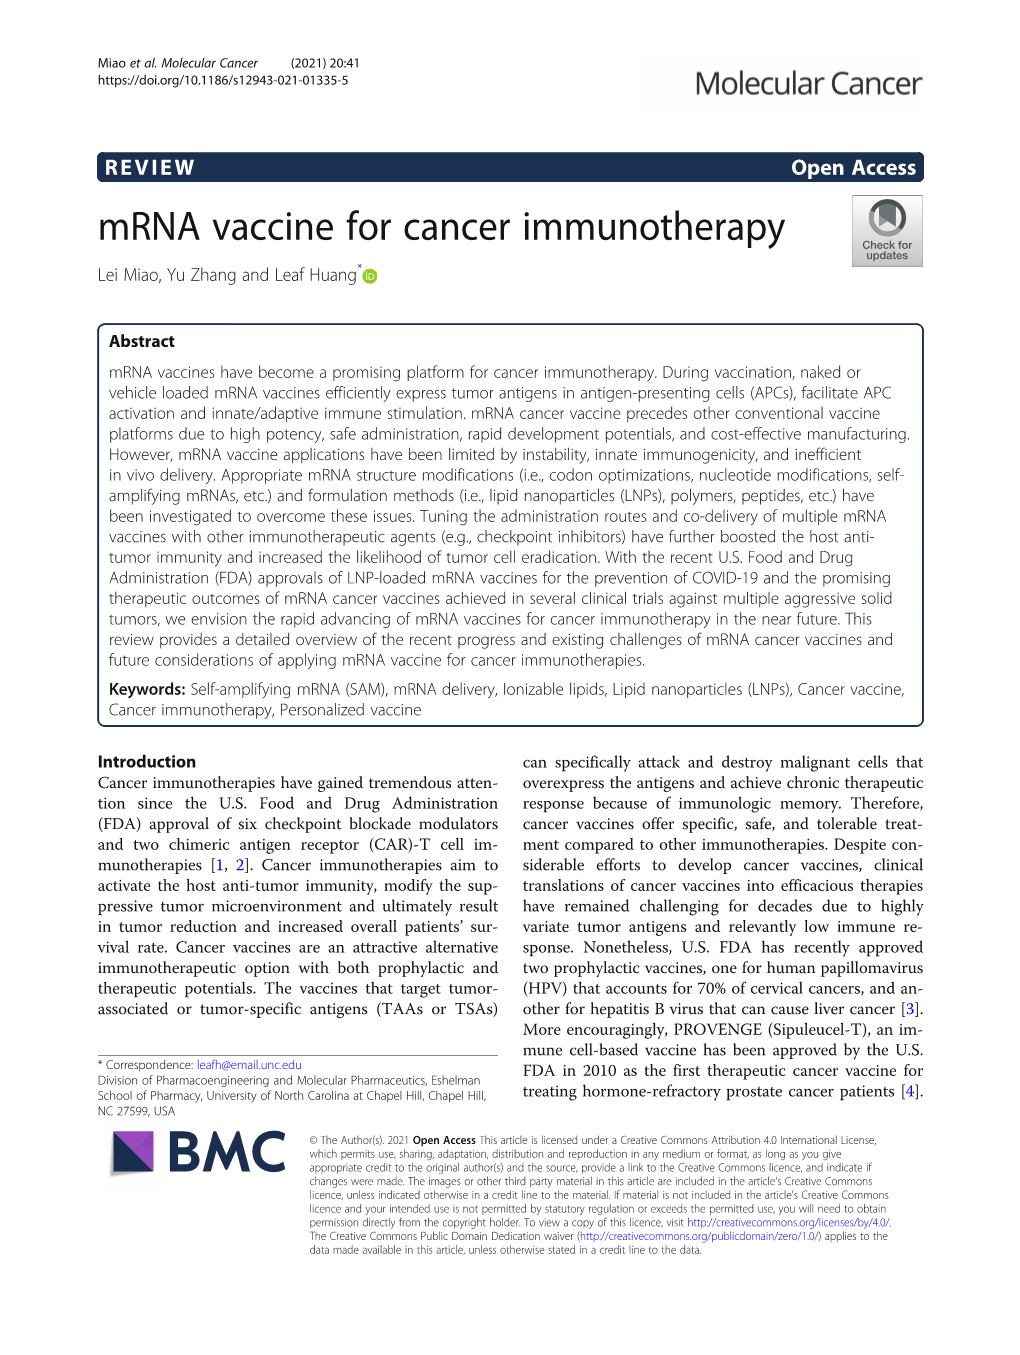 Mrna Vaccine for Cancer Immunotherapy Lei Miao, Yu Zhang and Leaf Huang*